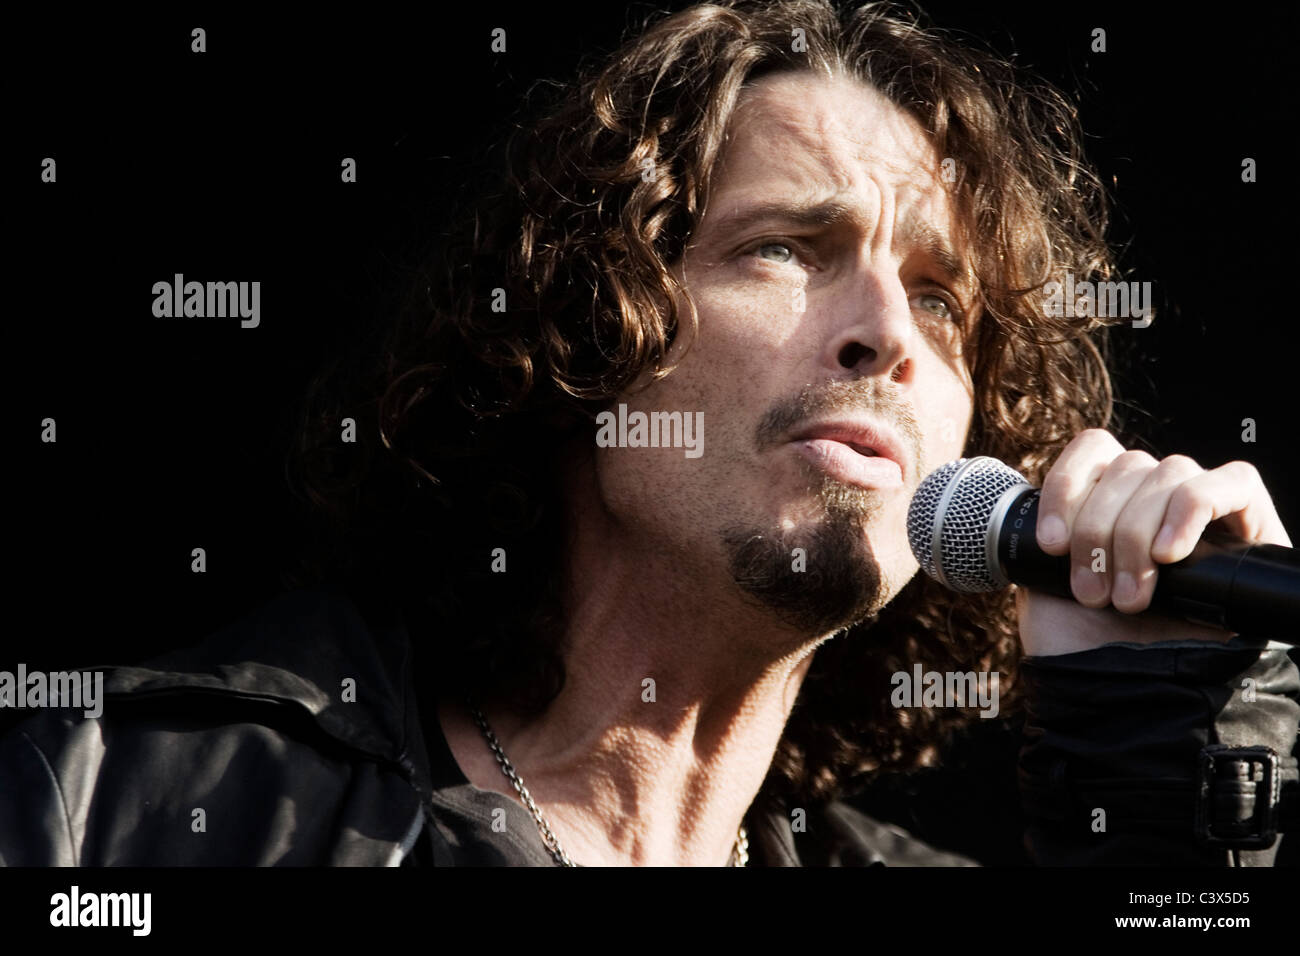 American singer Chris Cornell plays the Second Stage at Download Festival in Castle Donnington, Leicestershire. Stock Photo